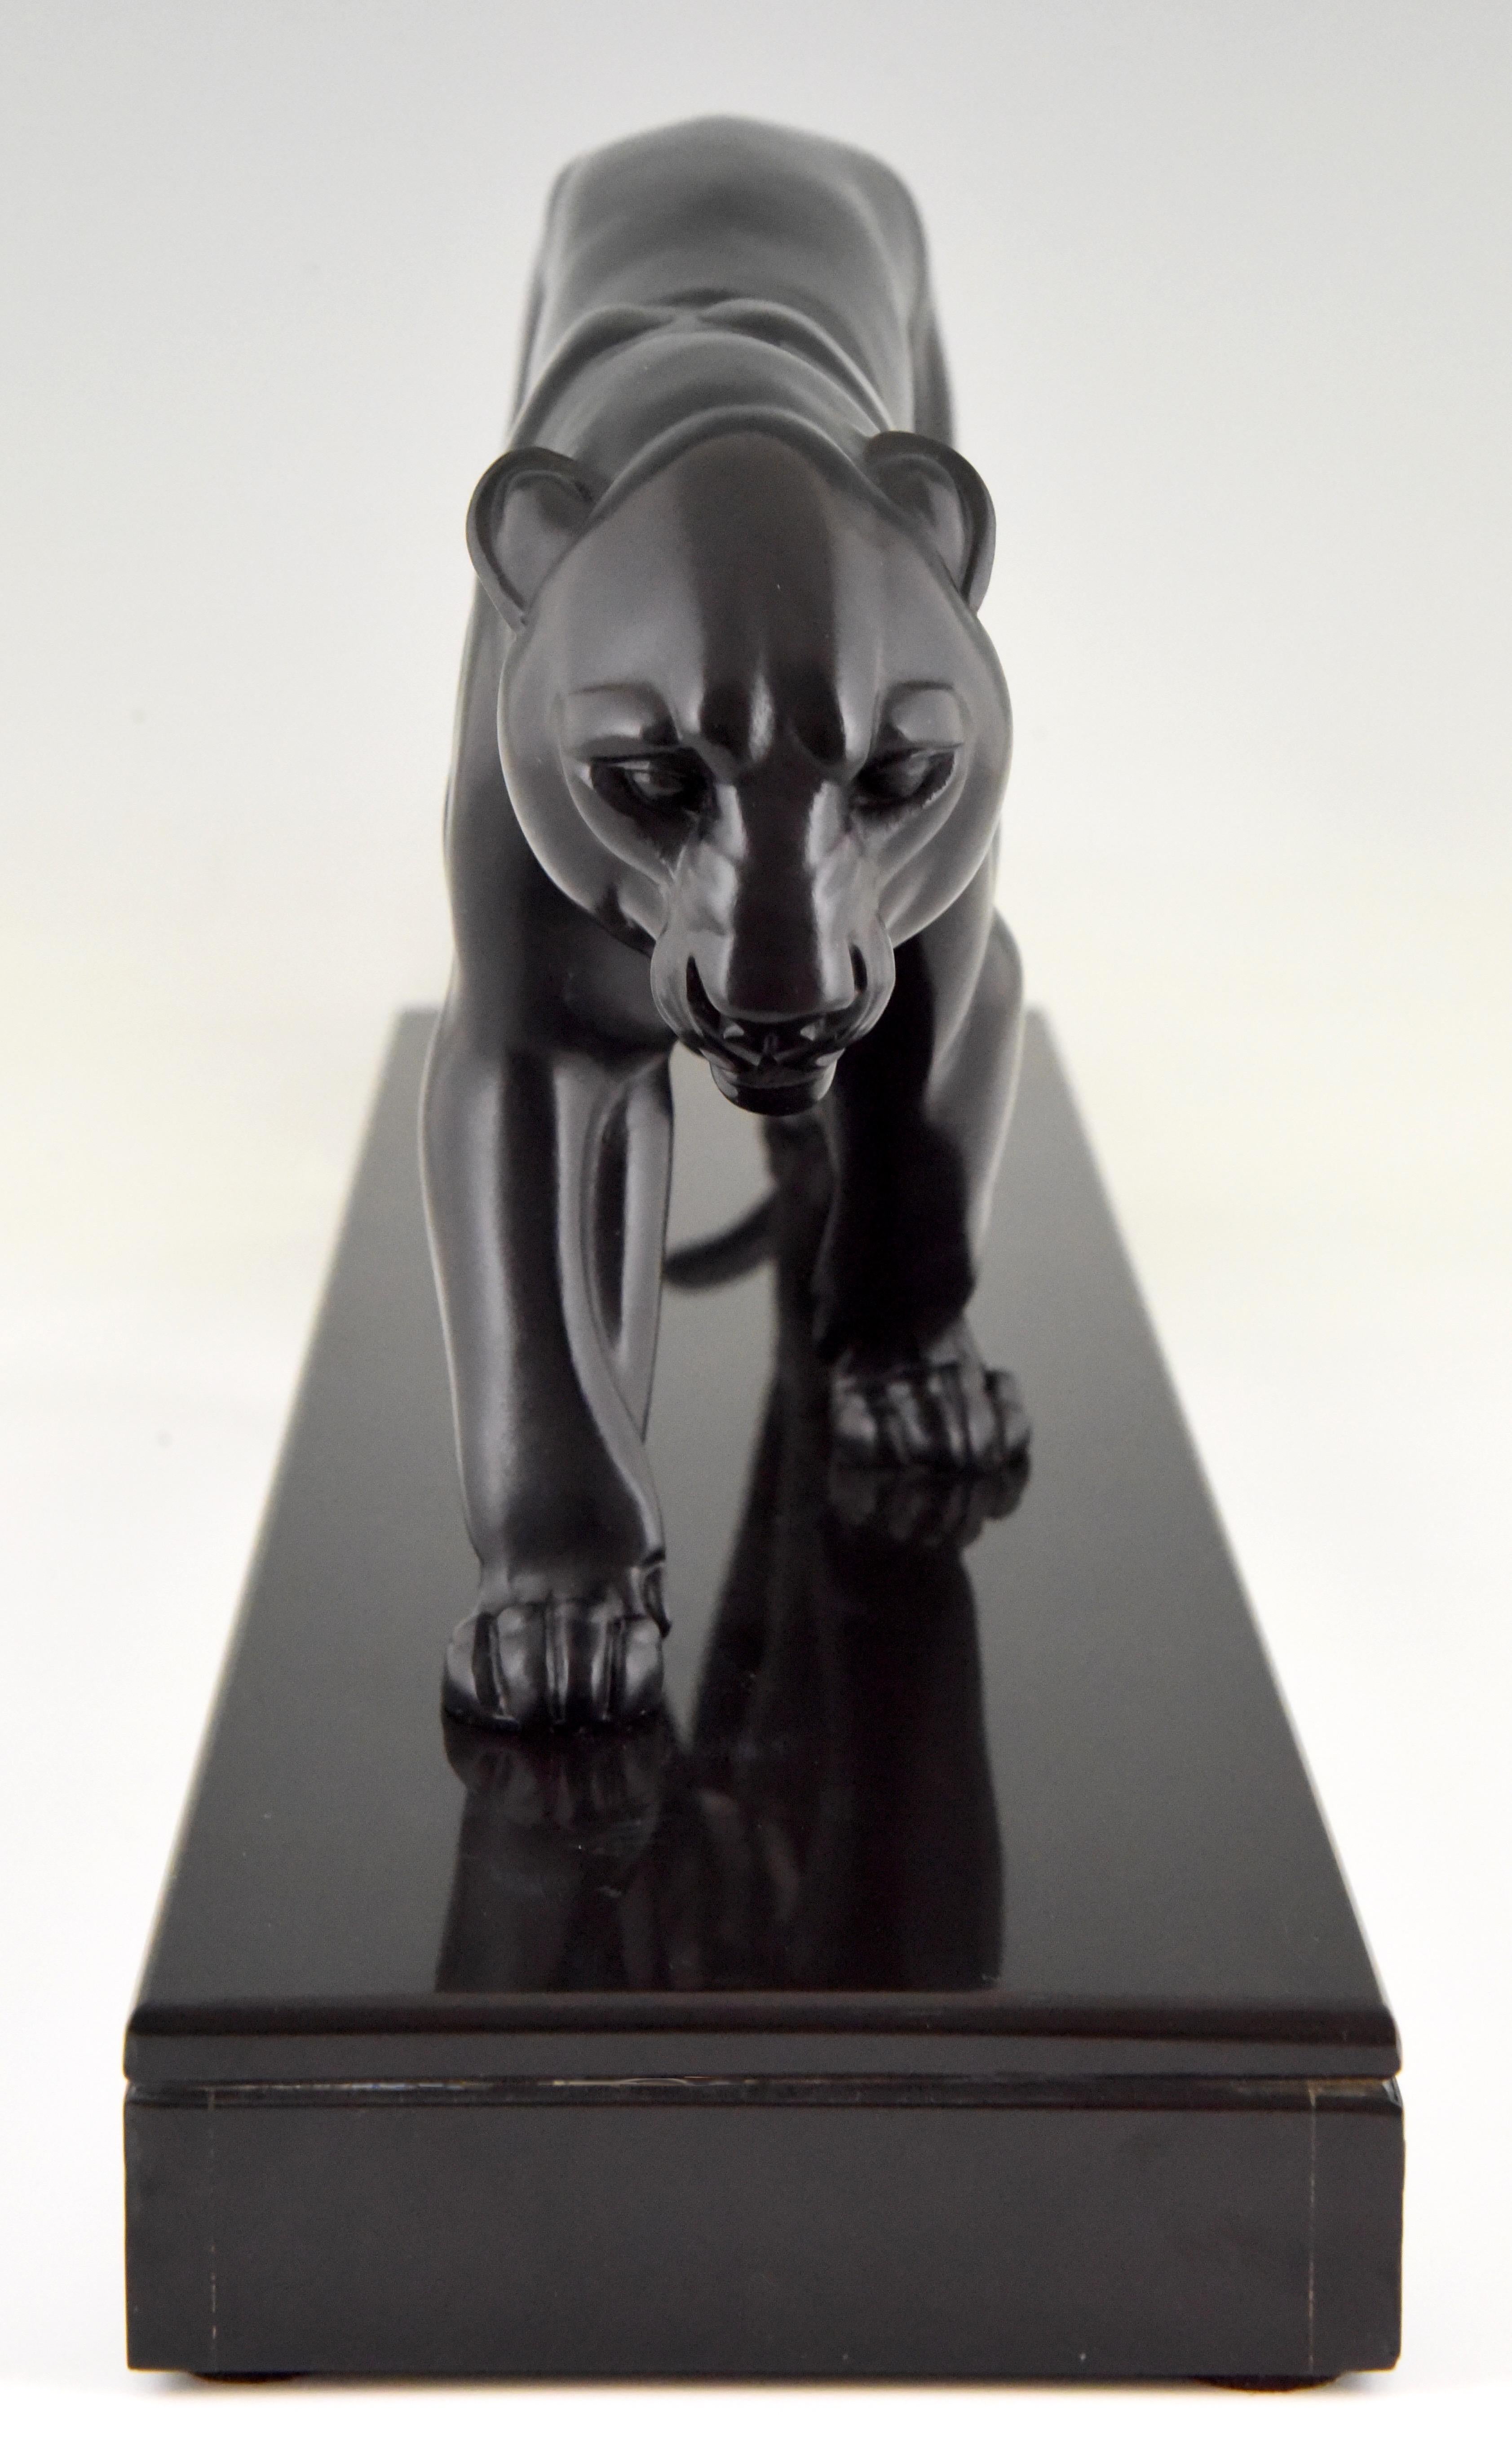 Patinated Irenee Rochard Art Deco Sculpture Black Panther France 1930